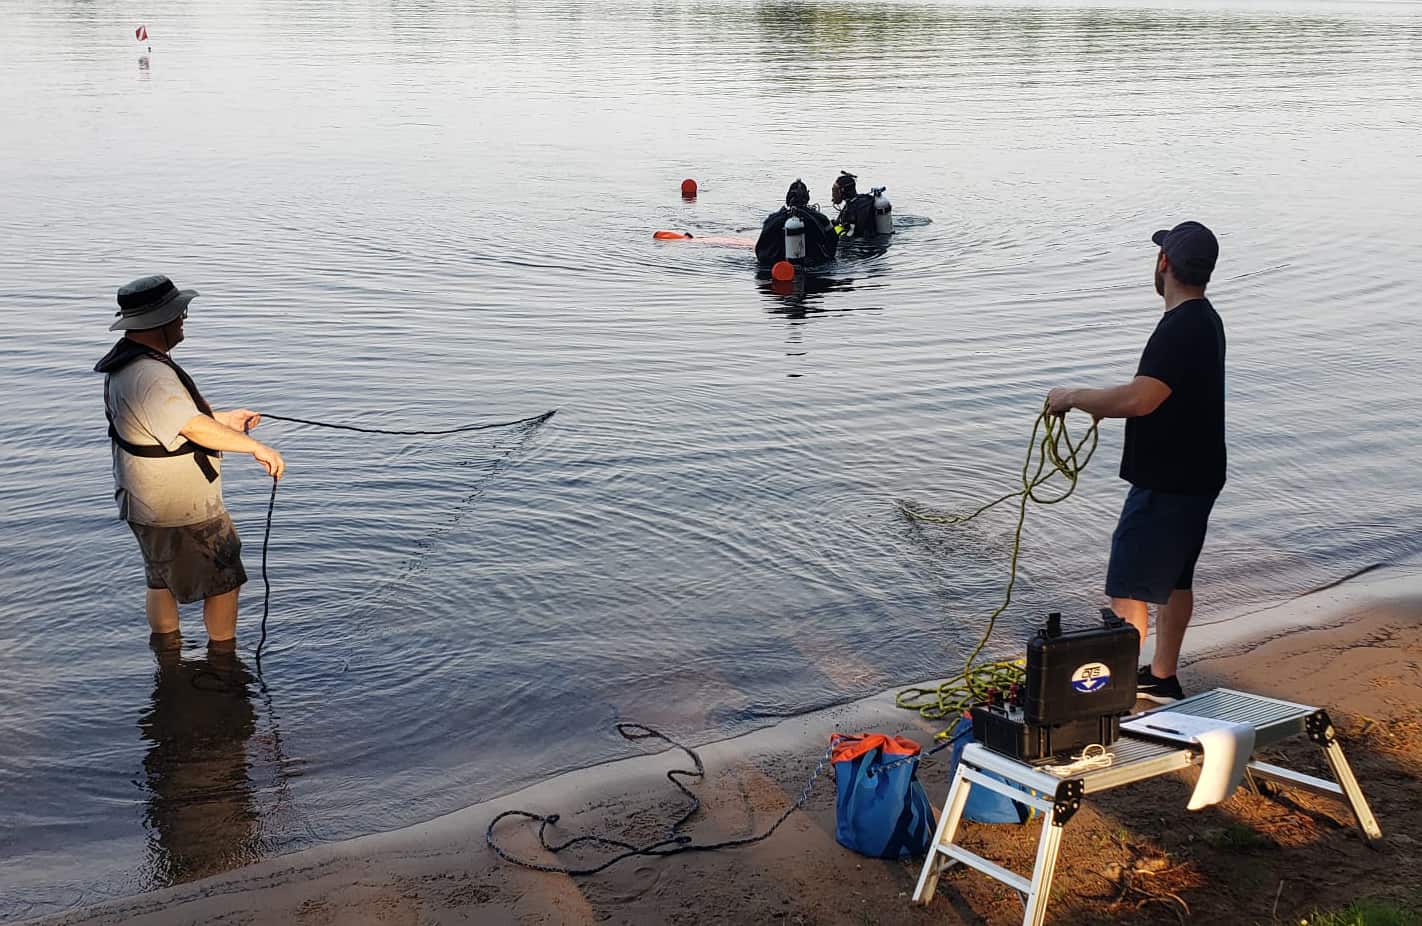 Oneida, Lincoln County Sheriff’s Office dive teams train together at Katherine Lake